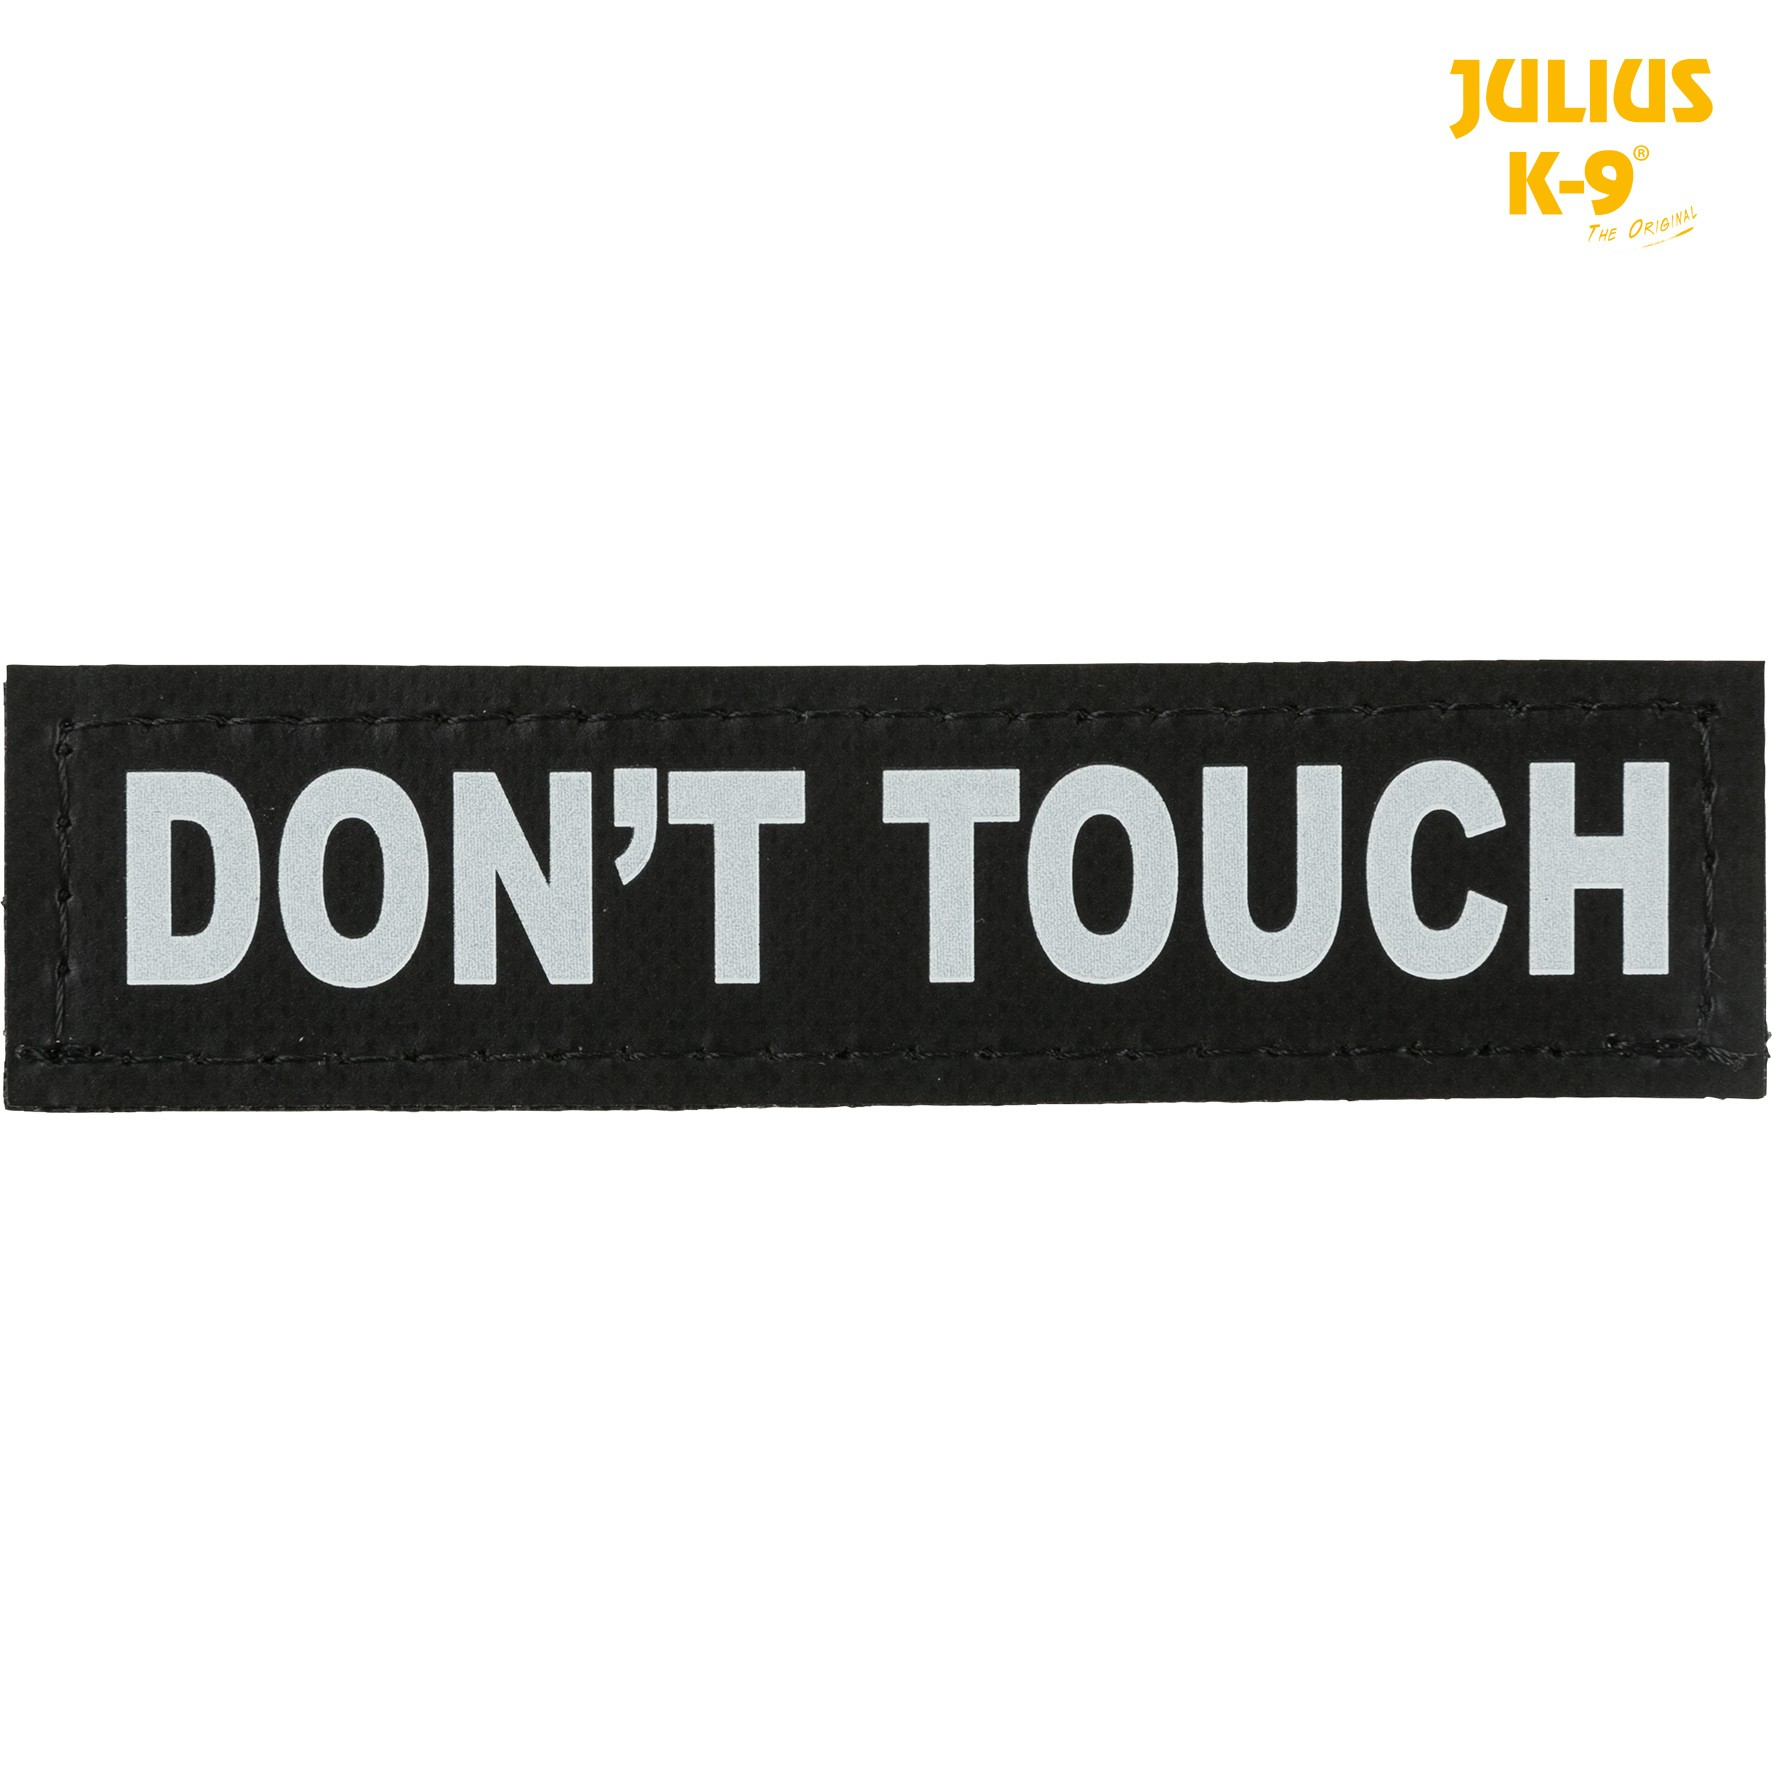 2 velcro stickers DON'T TOUCH Julius-K9®